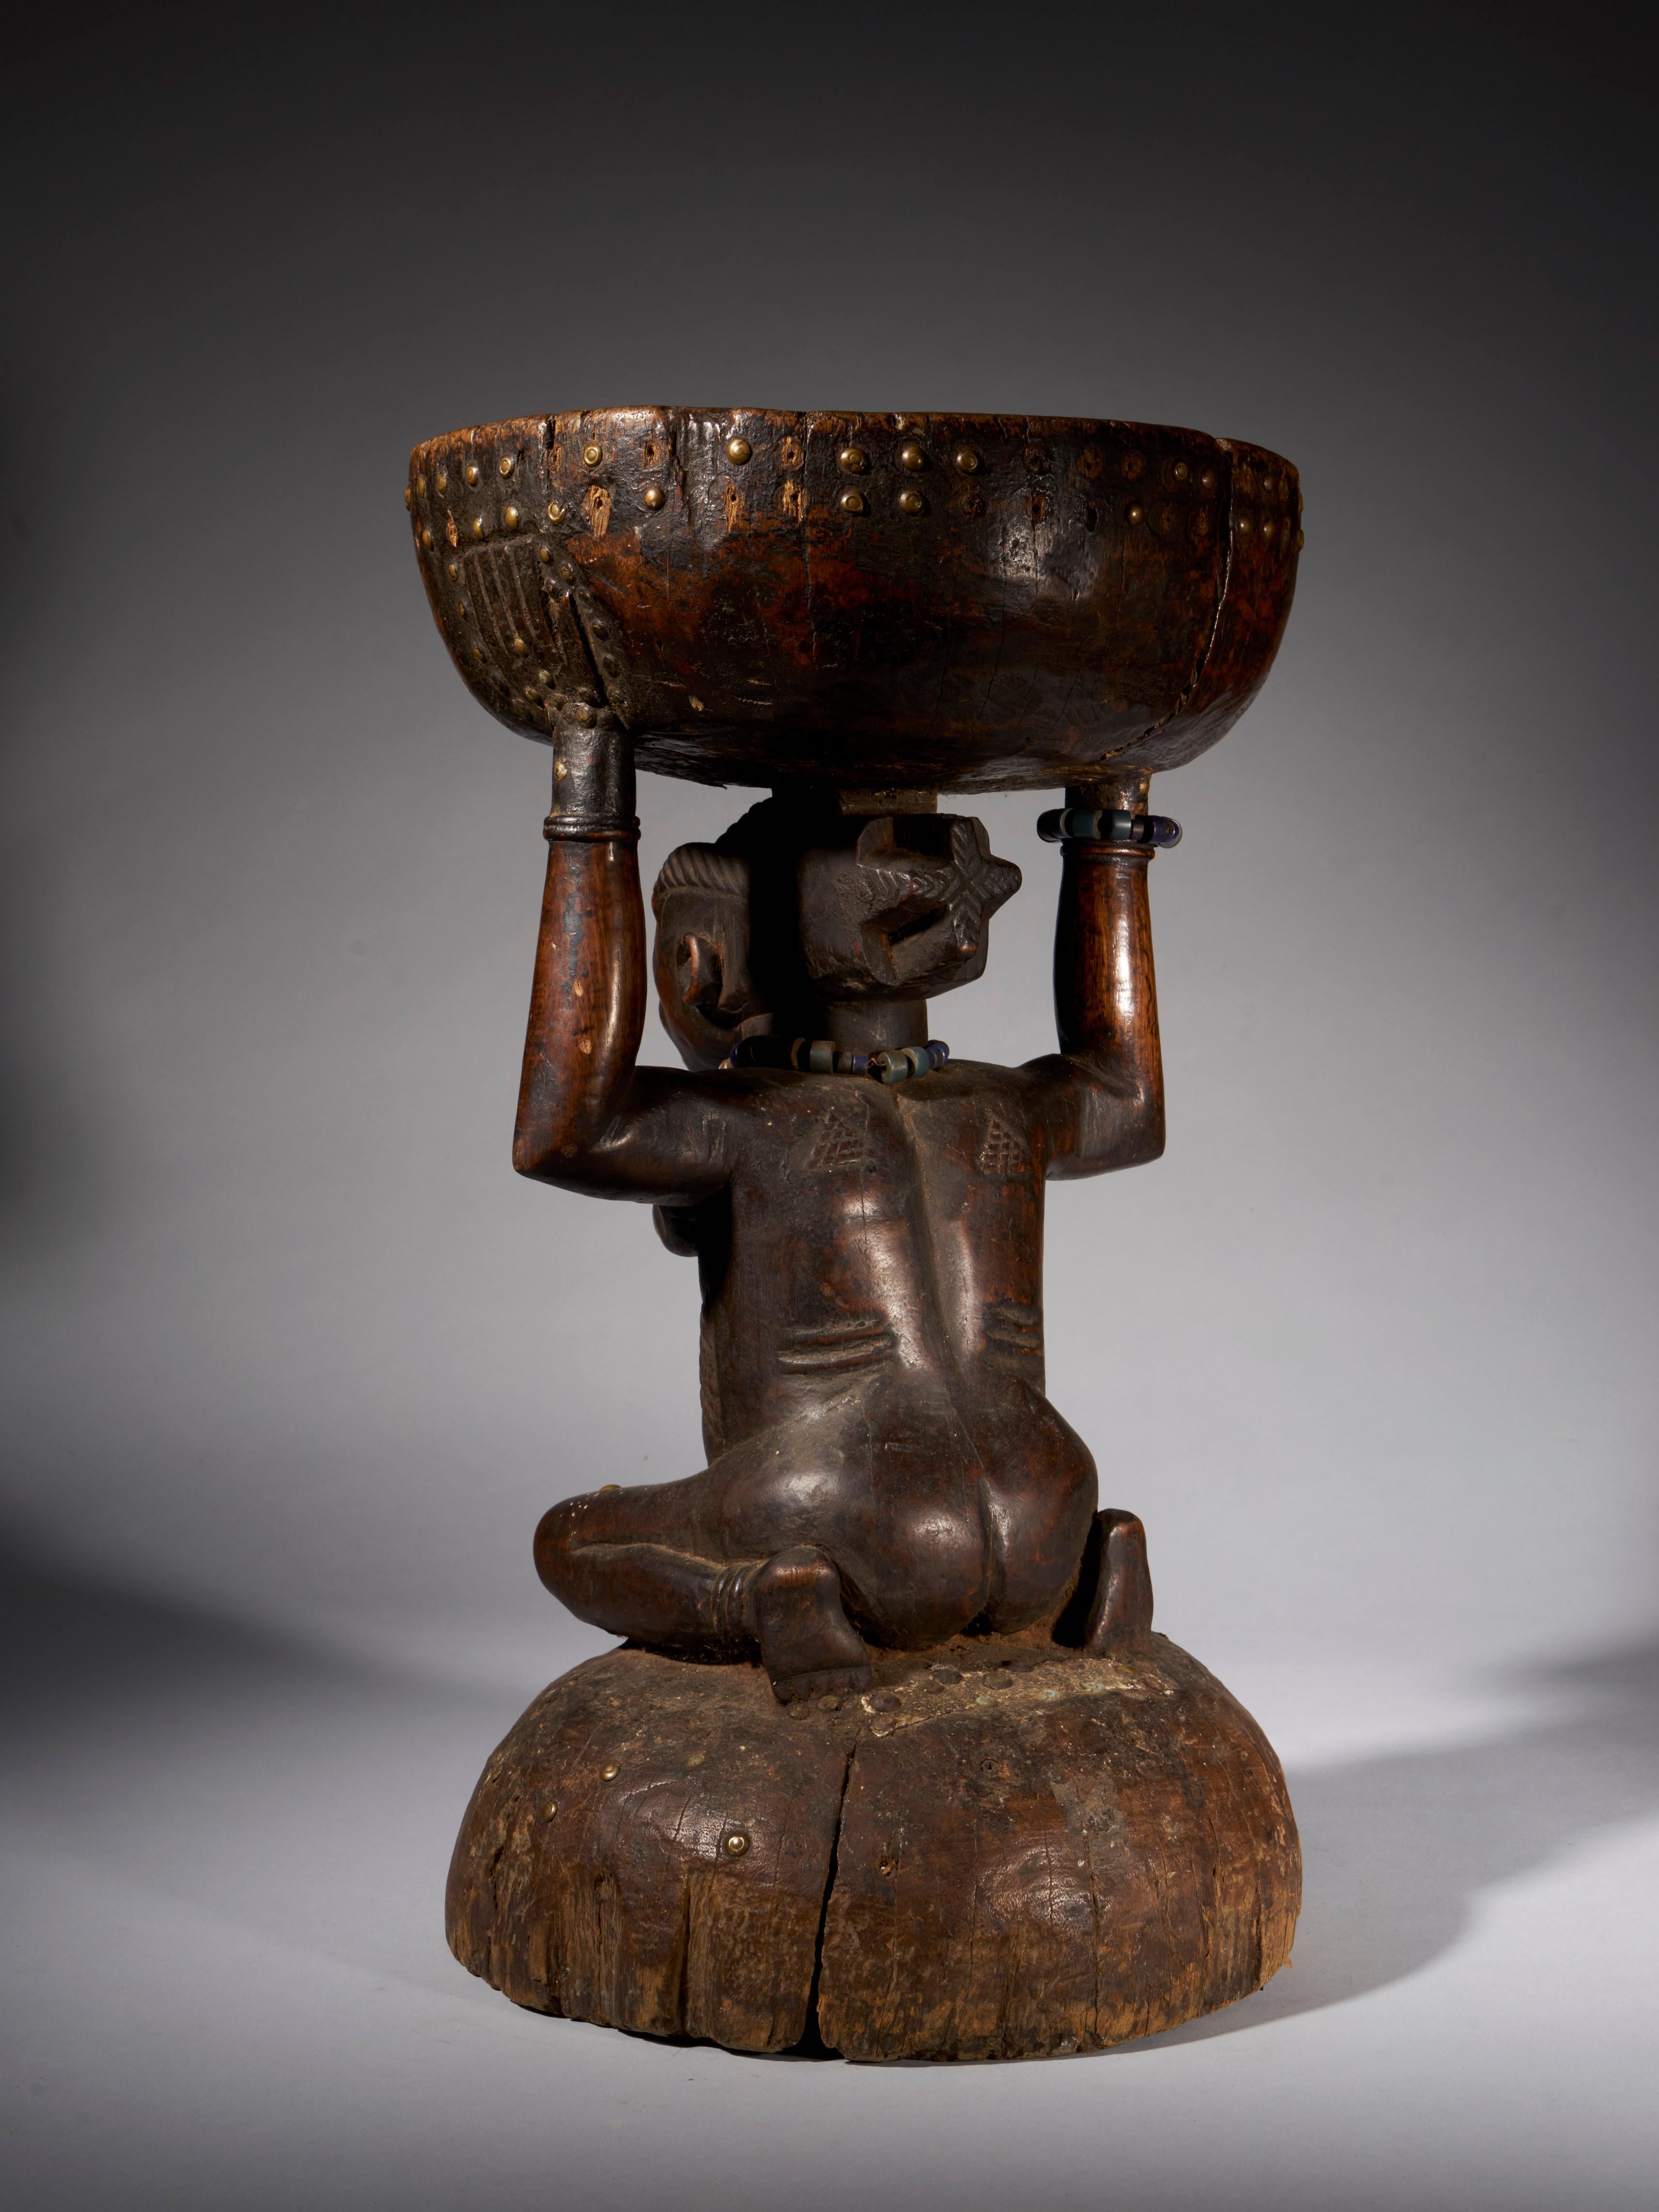 Congolese Massive and Robust Zela Caryatide Stool Held by a Female Sculpture